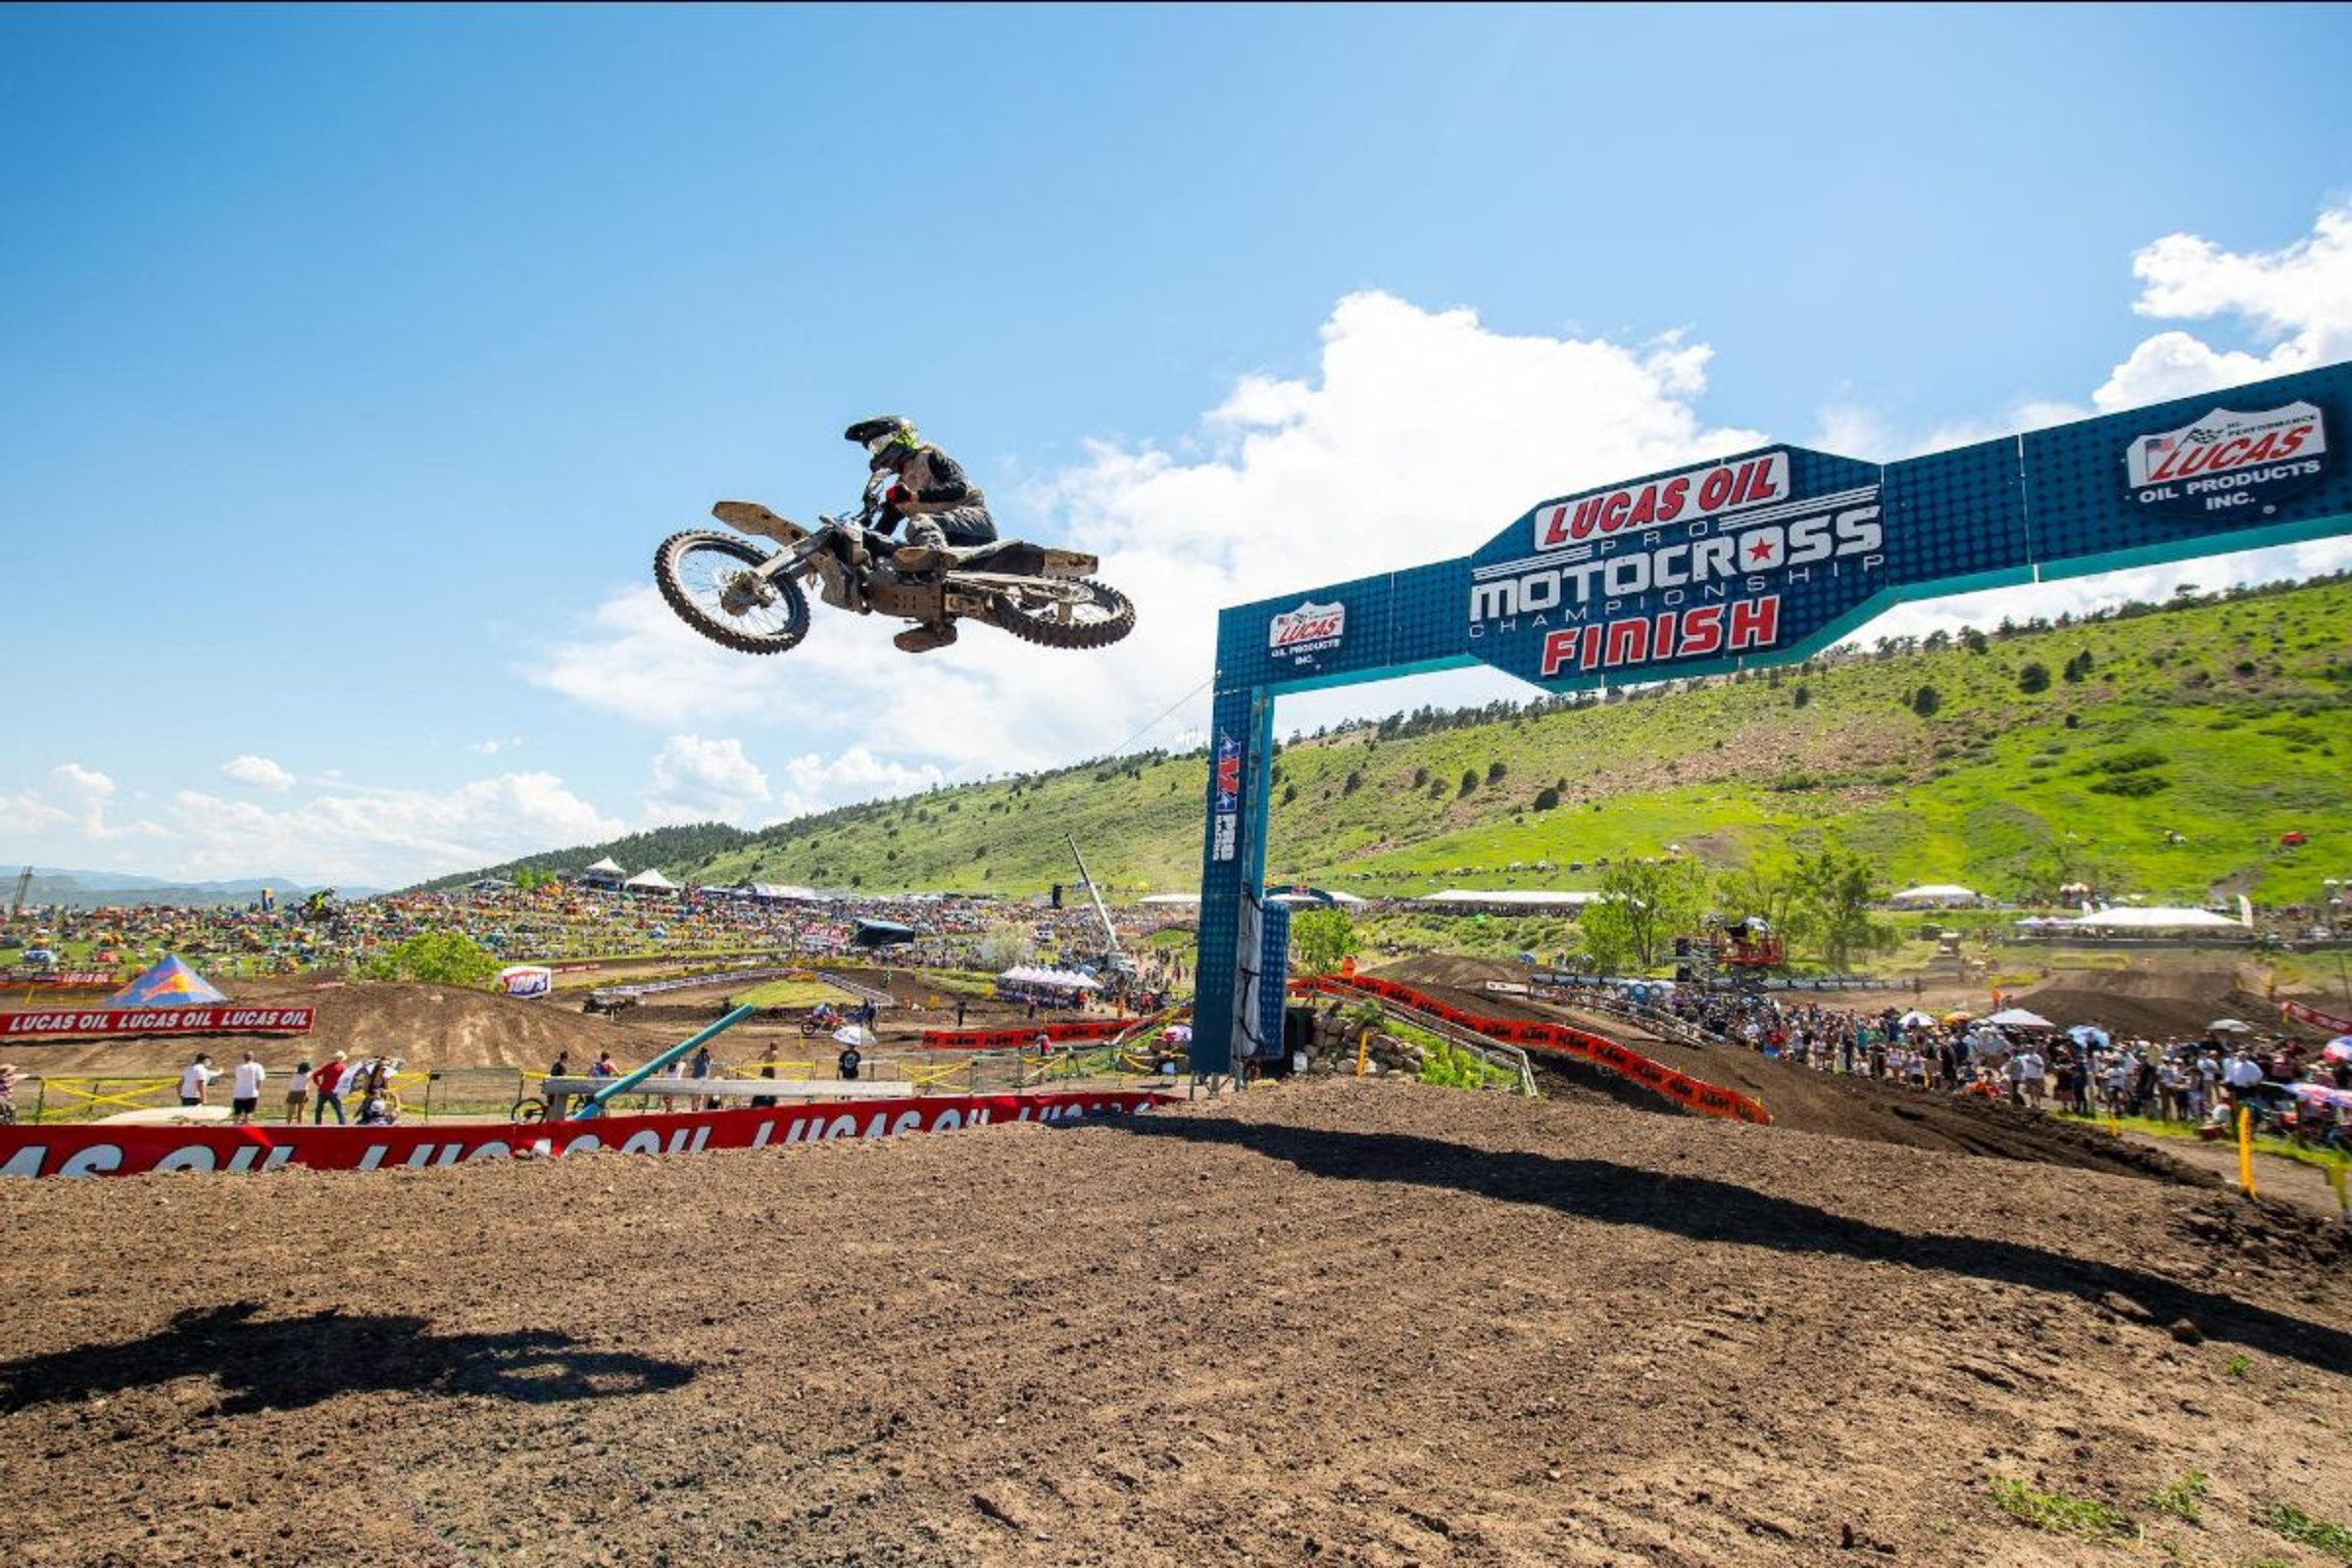 Lucas Oil to Continue as Title Sponsor of Pro Motocross for 14th Season